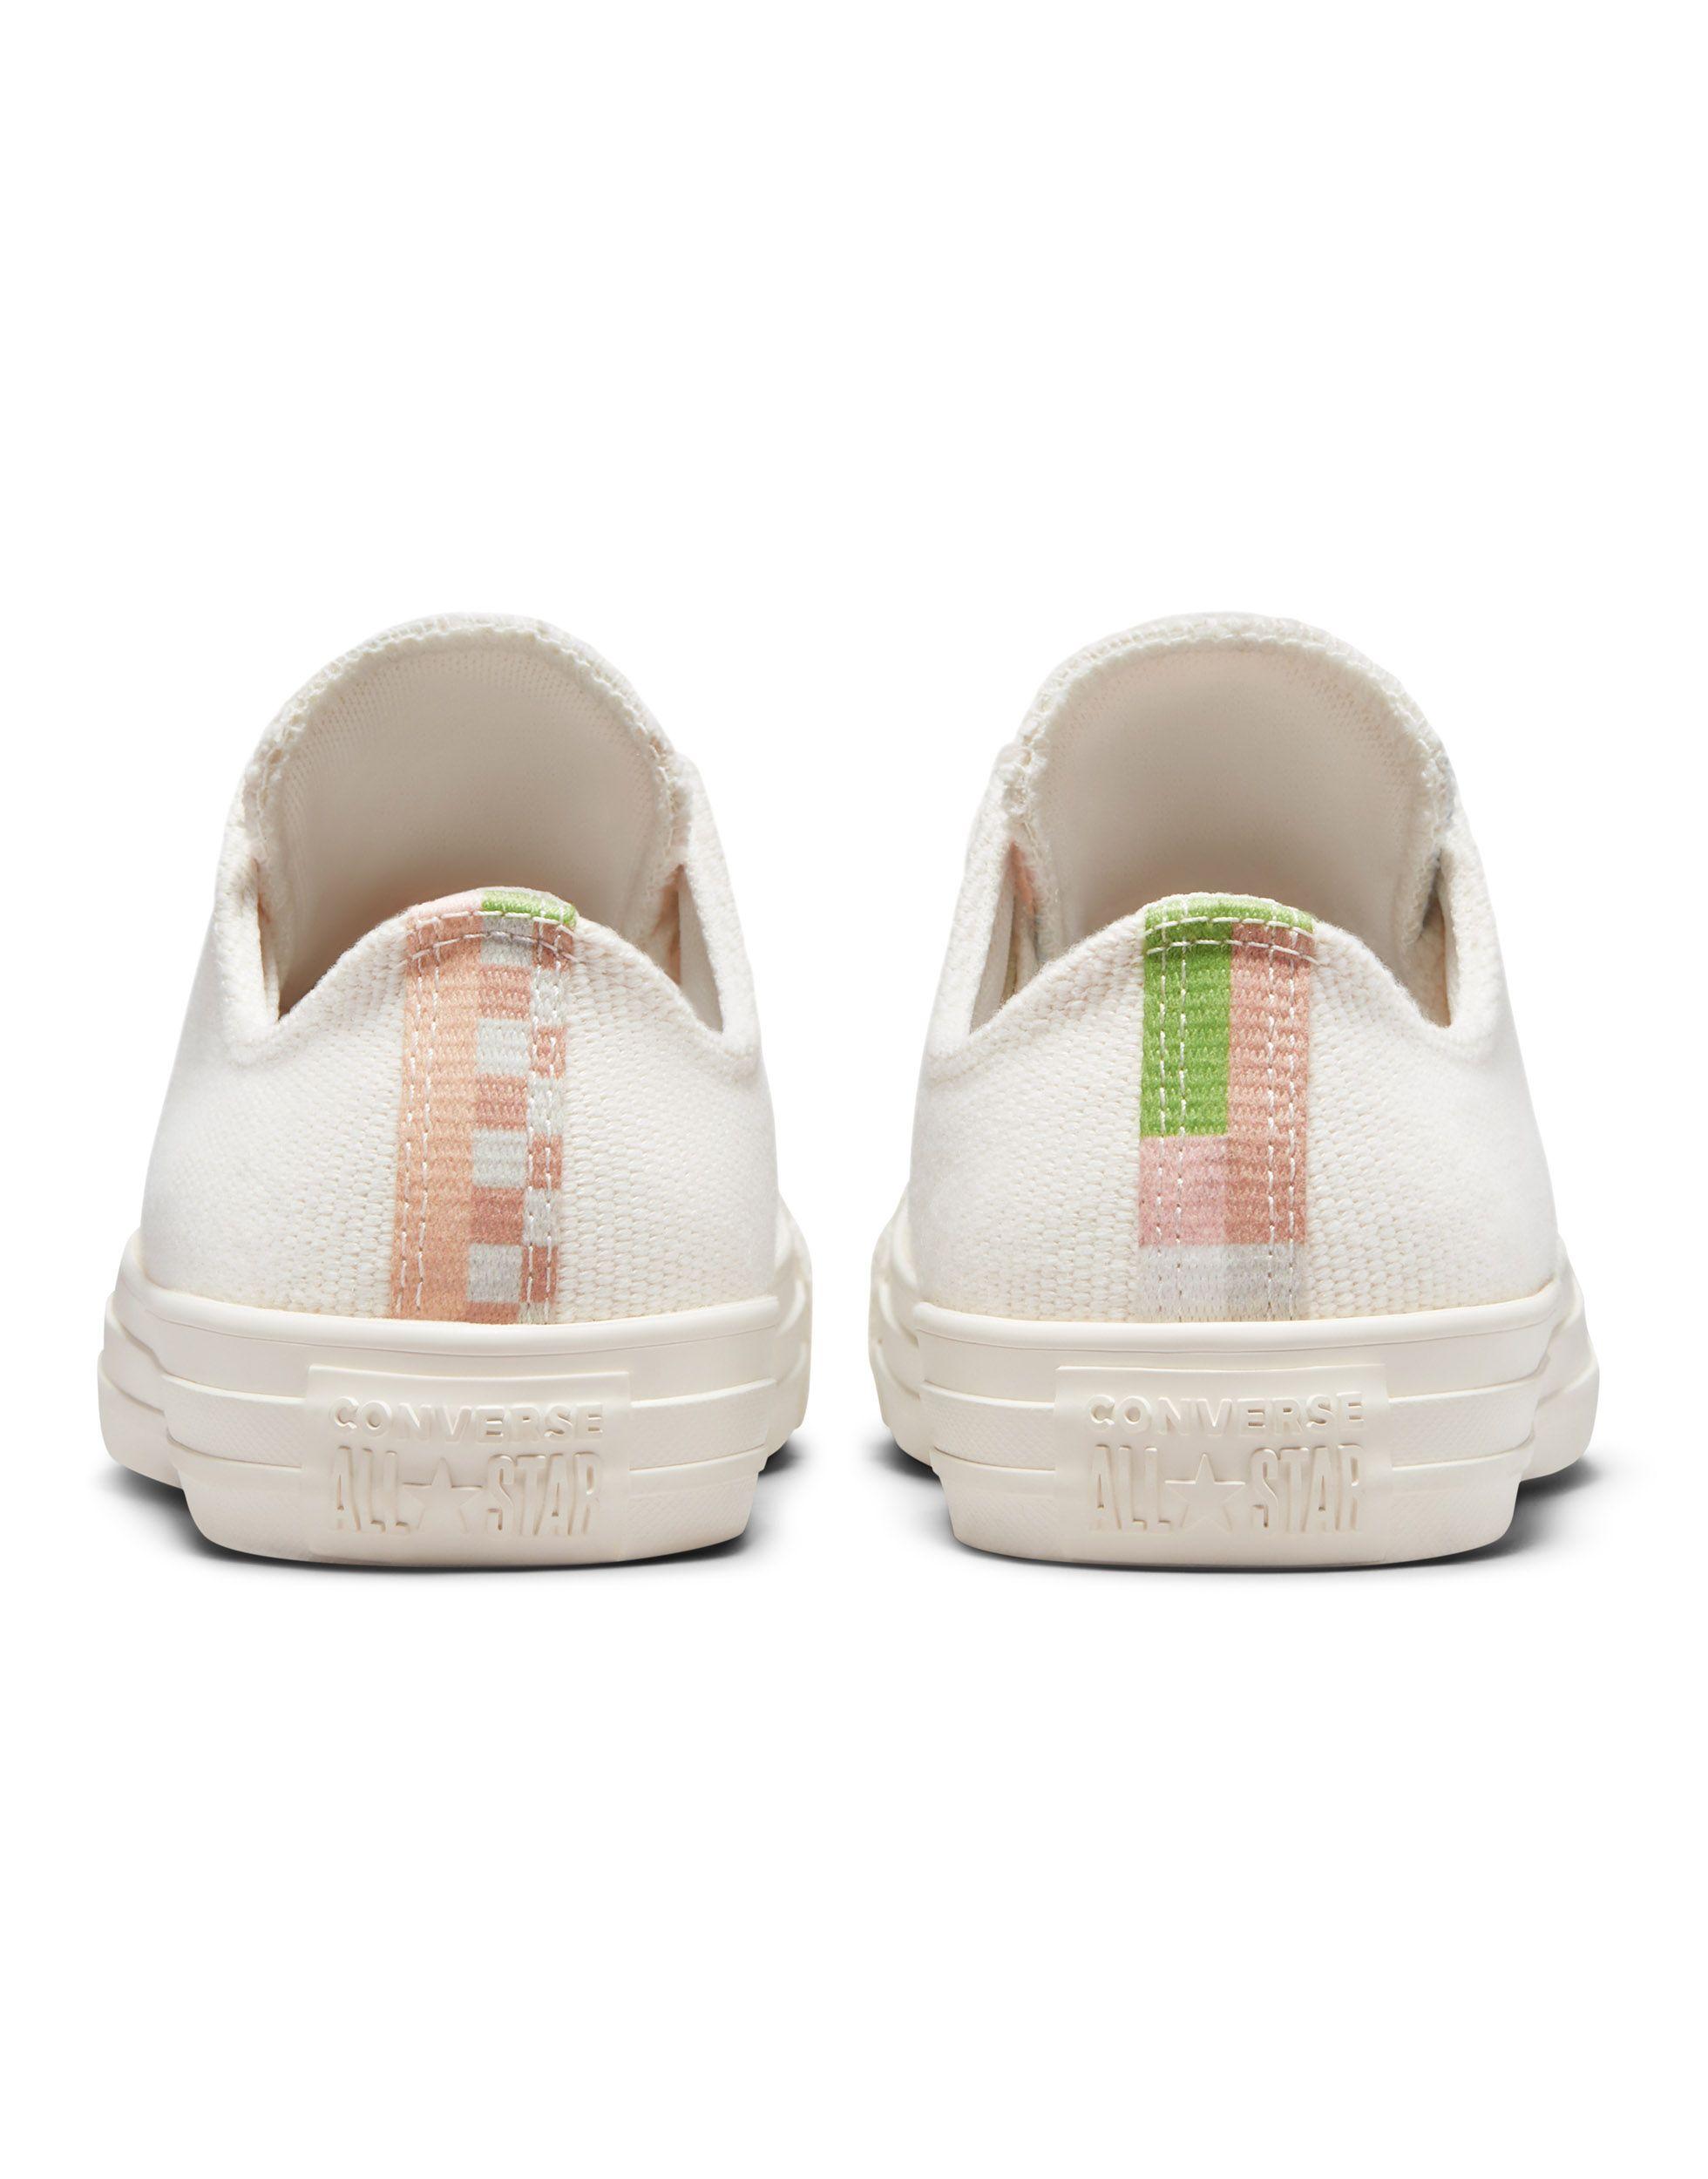 Converse Chuck All Star Ox Crafted Folk Canvas Sneakers in White | Lyst